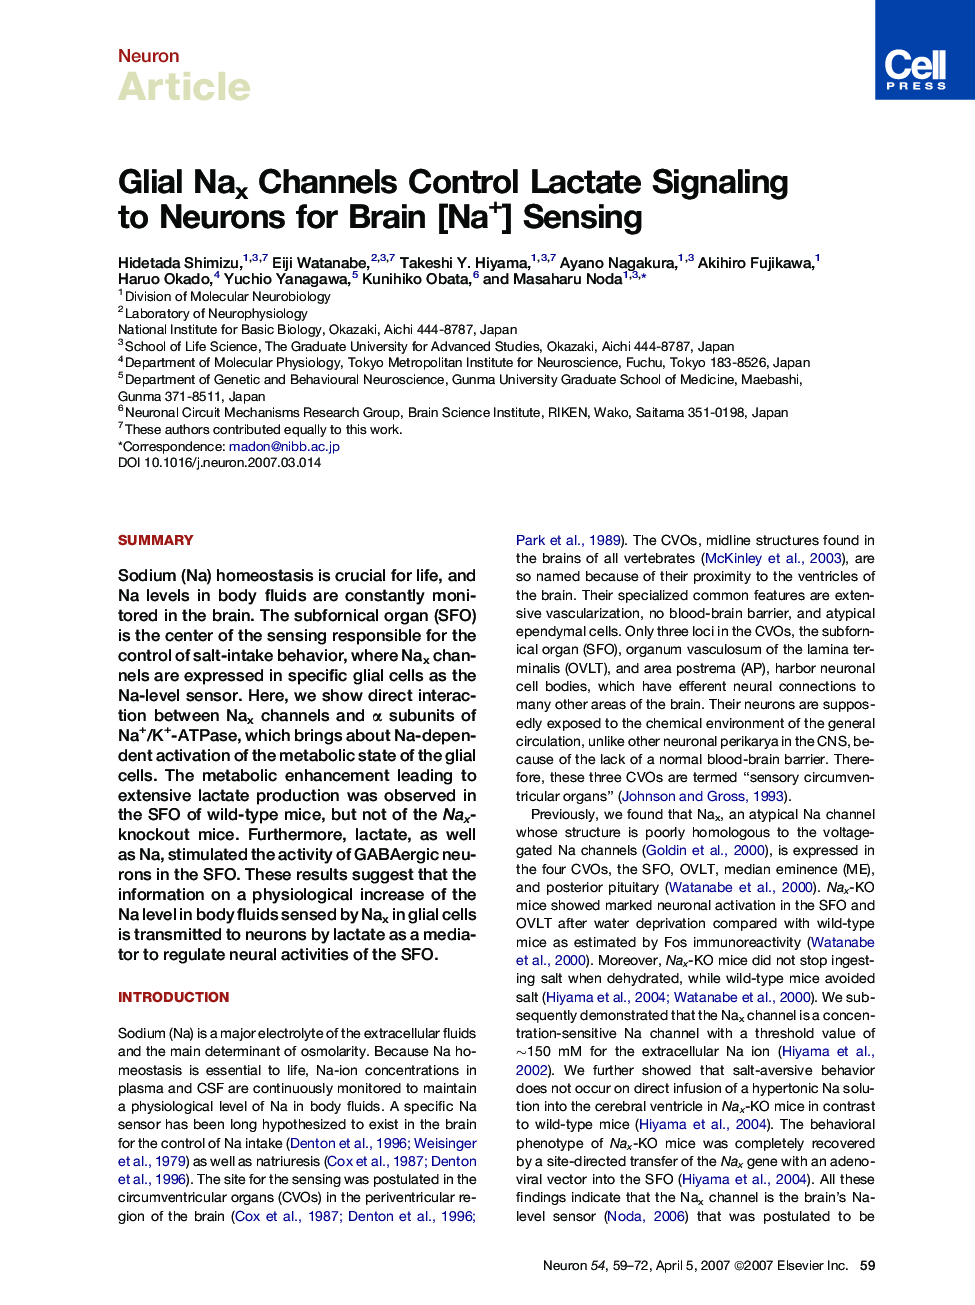 Glial Nax Channels Control Lactate Signaling to Neurons for Brain [Na+] Sensing